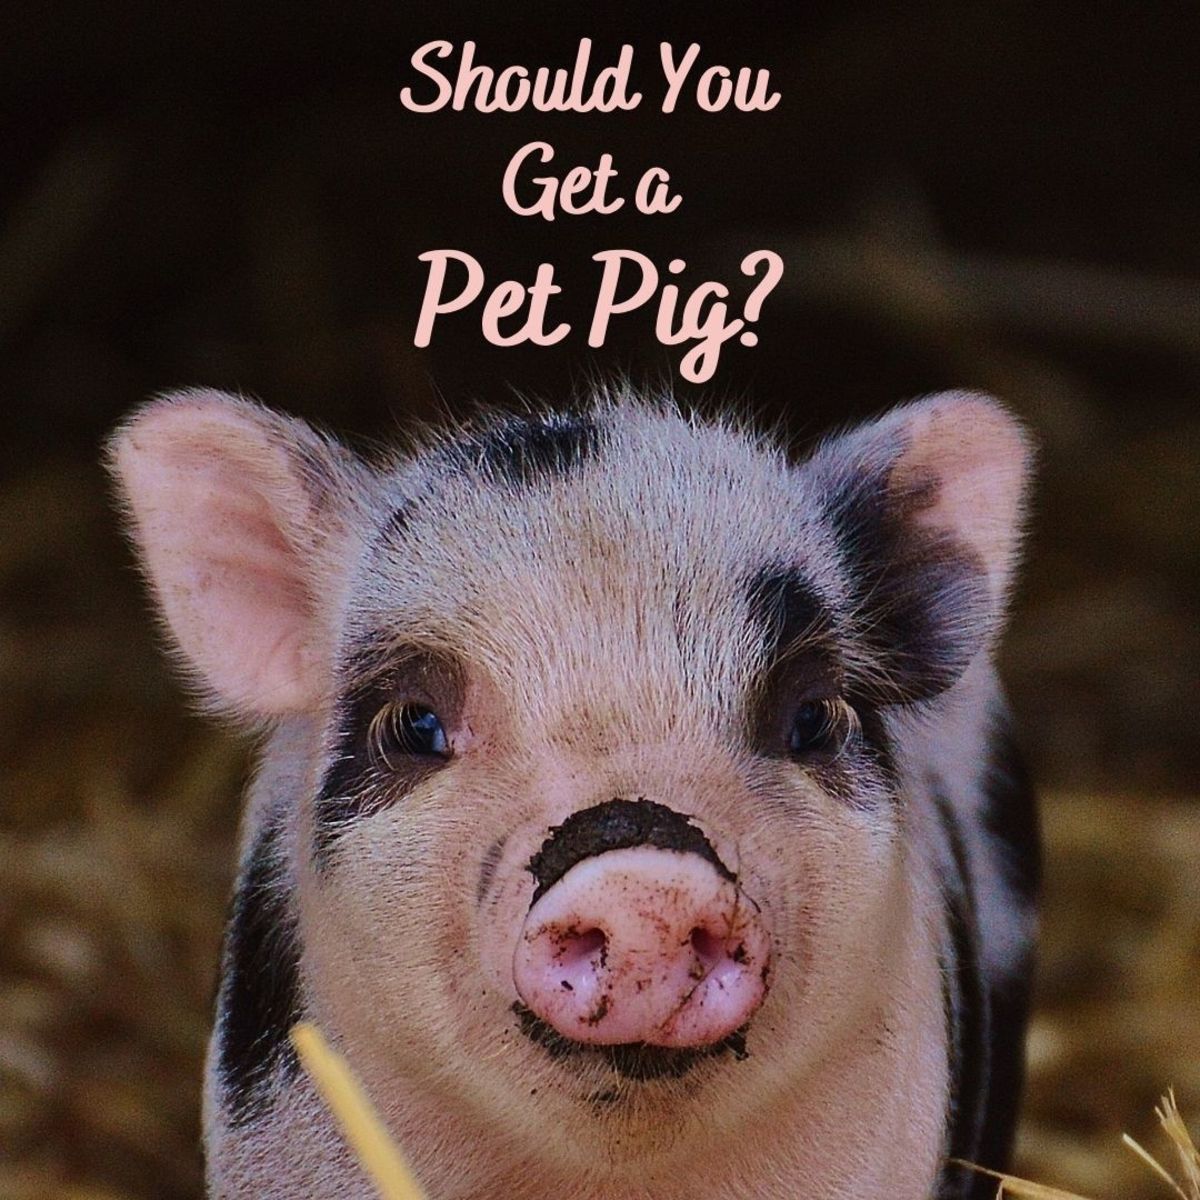 Is a pet pig the right choice for you?